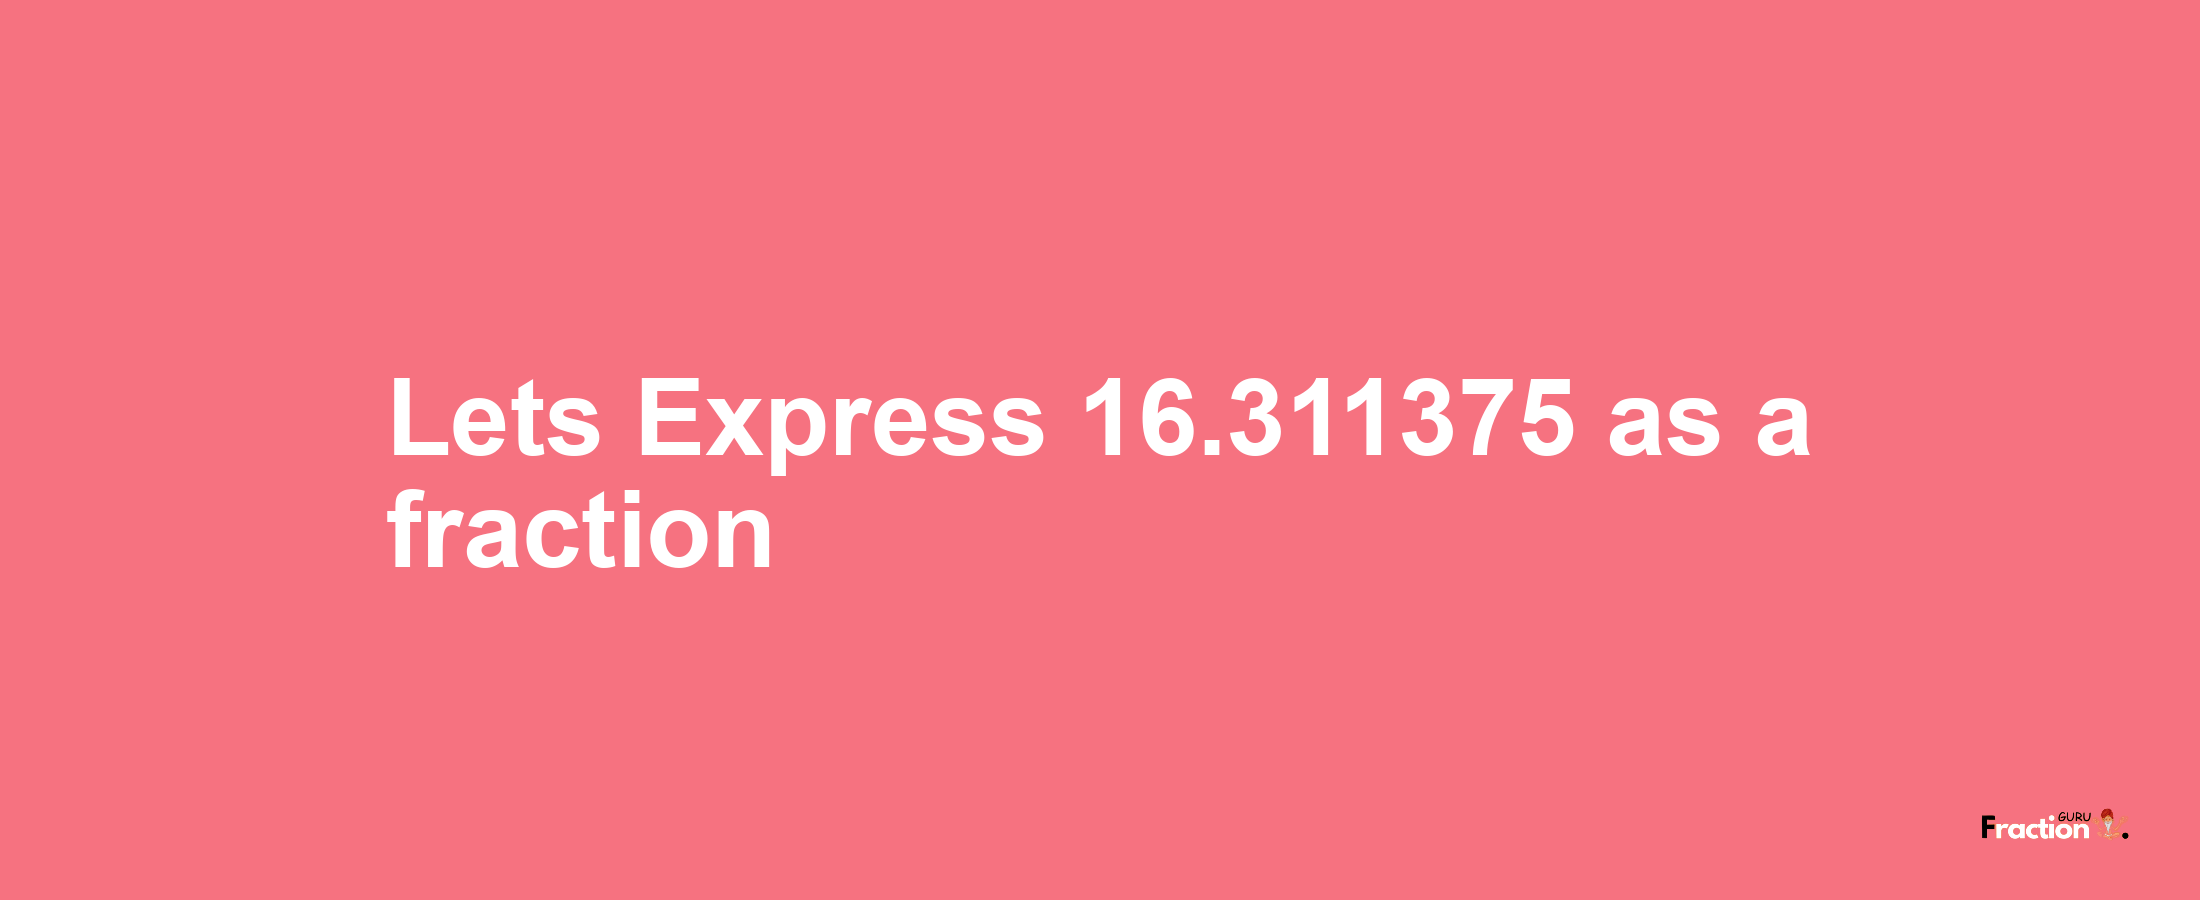 Lets Express 16.311375 as afraction